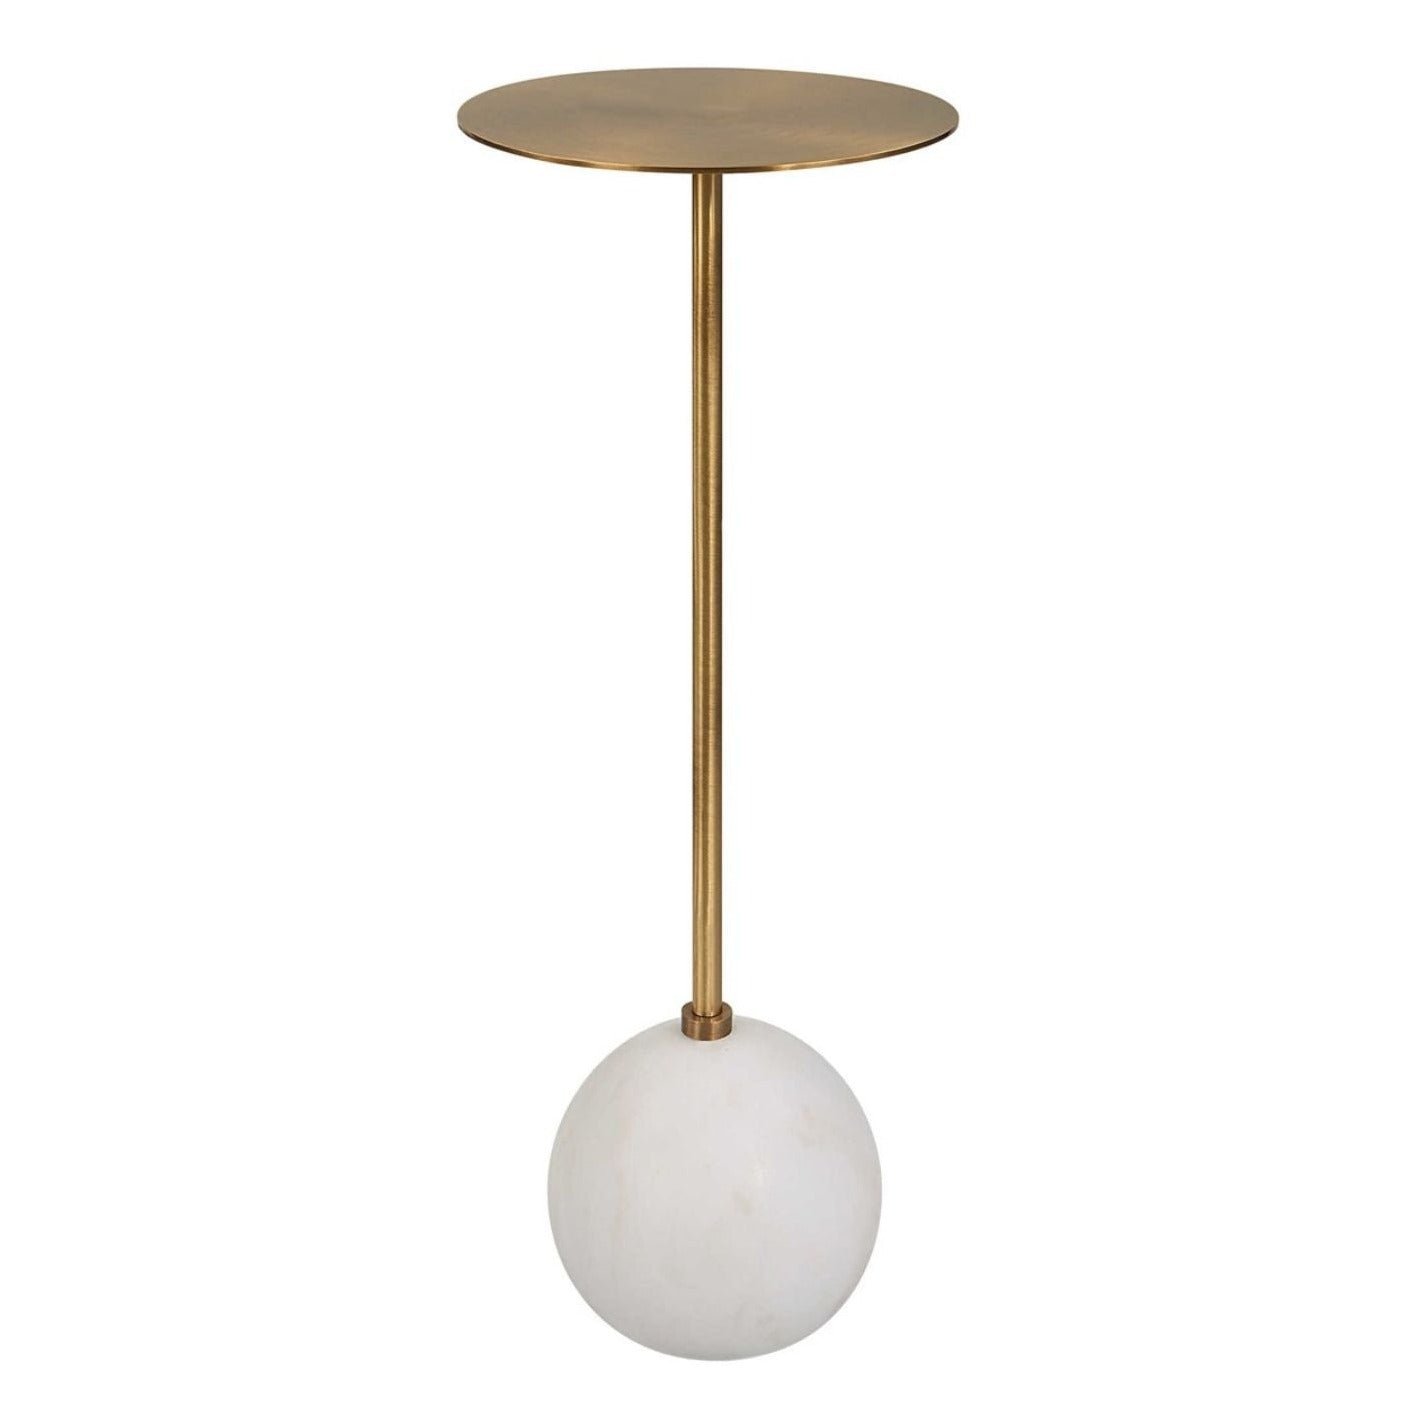 An elegant honed white marble foot supports the solid round brass top.